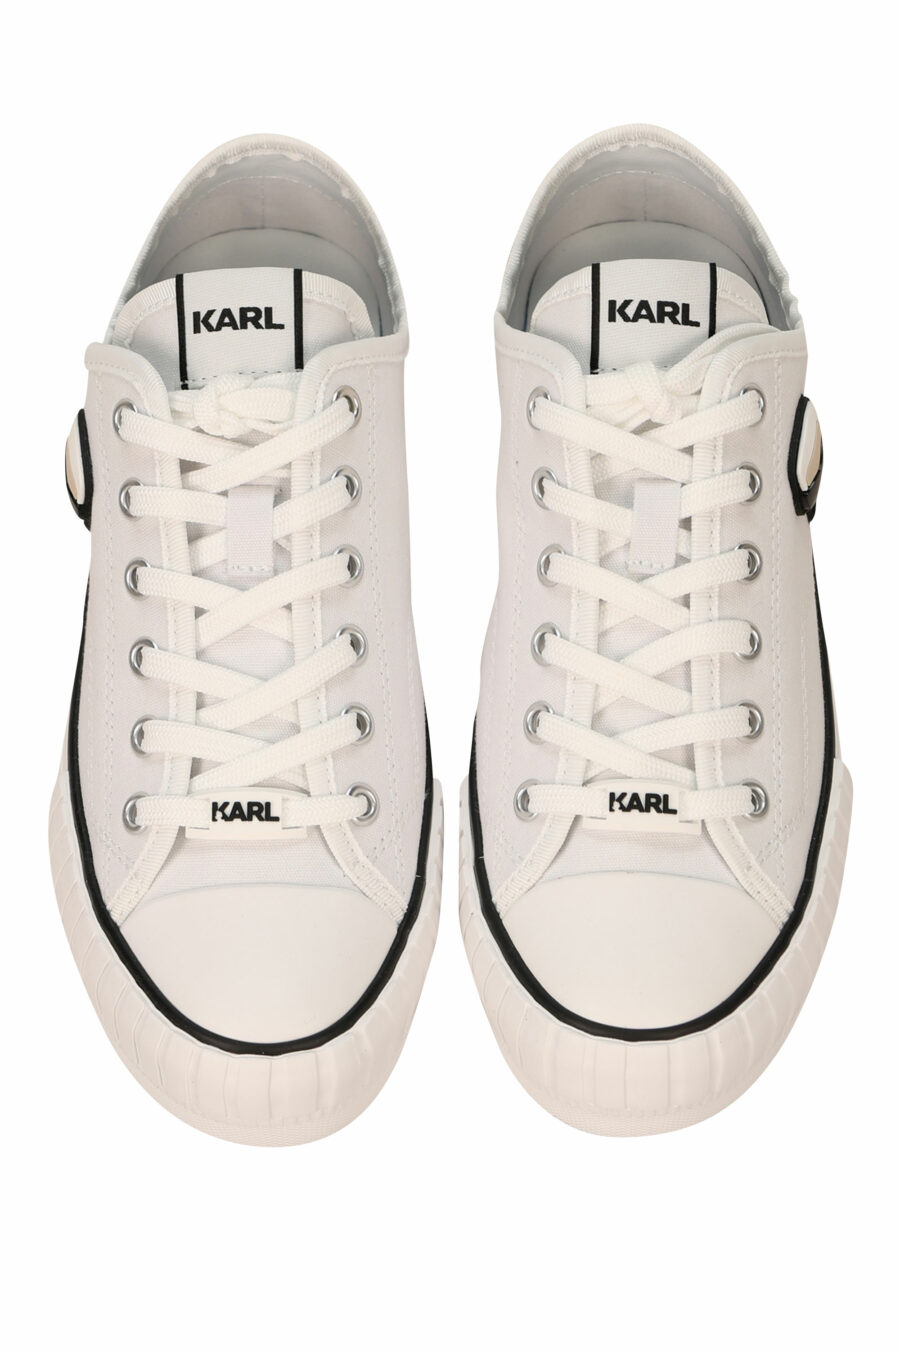 White converse-style trainers with rubber mini-logo "karl" - 5059529384639 4